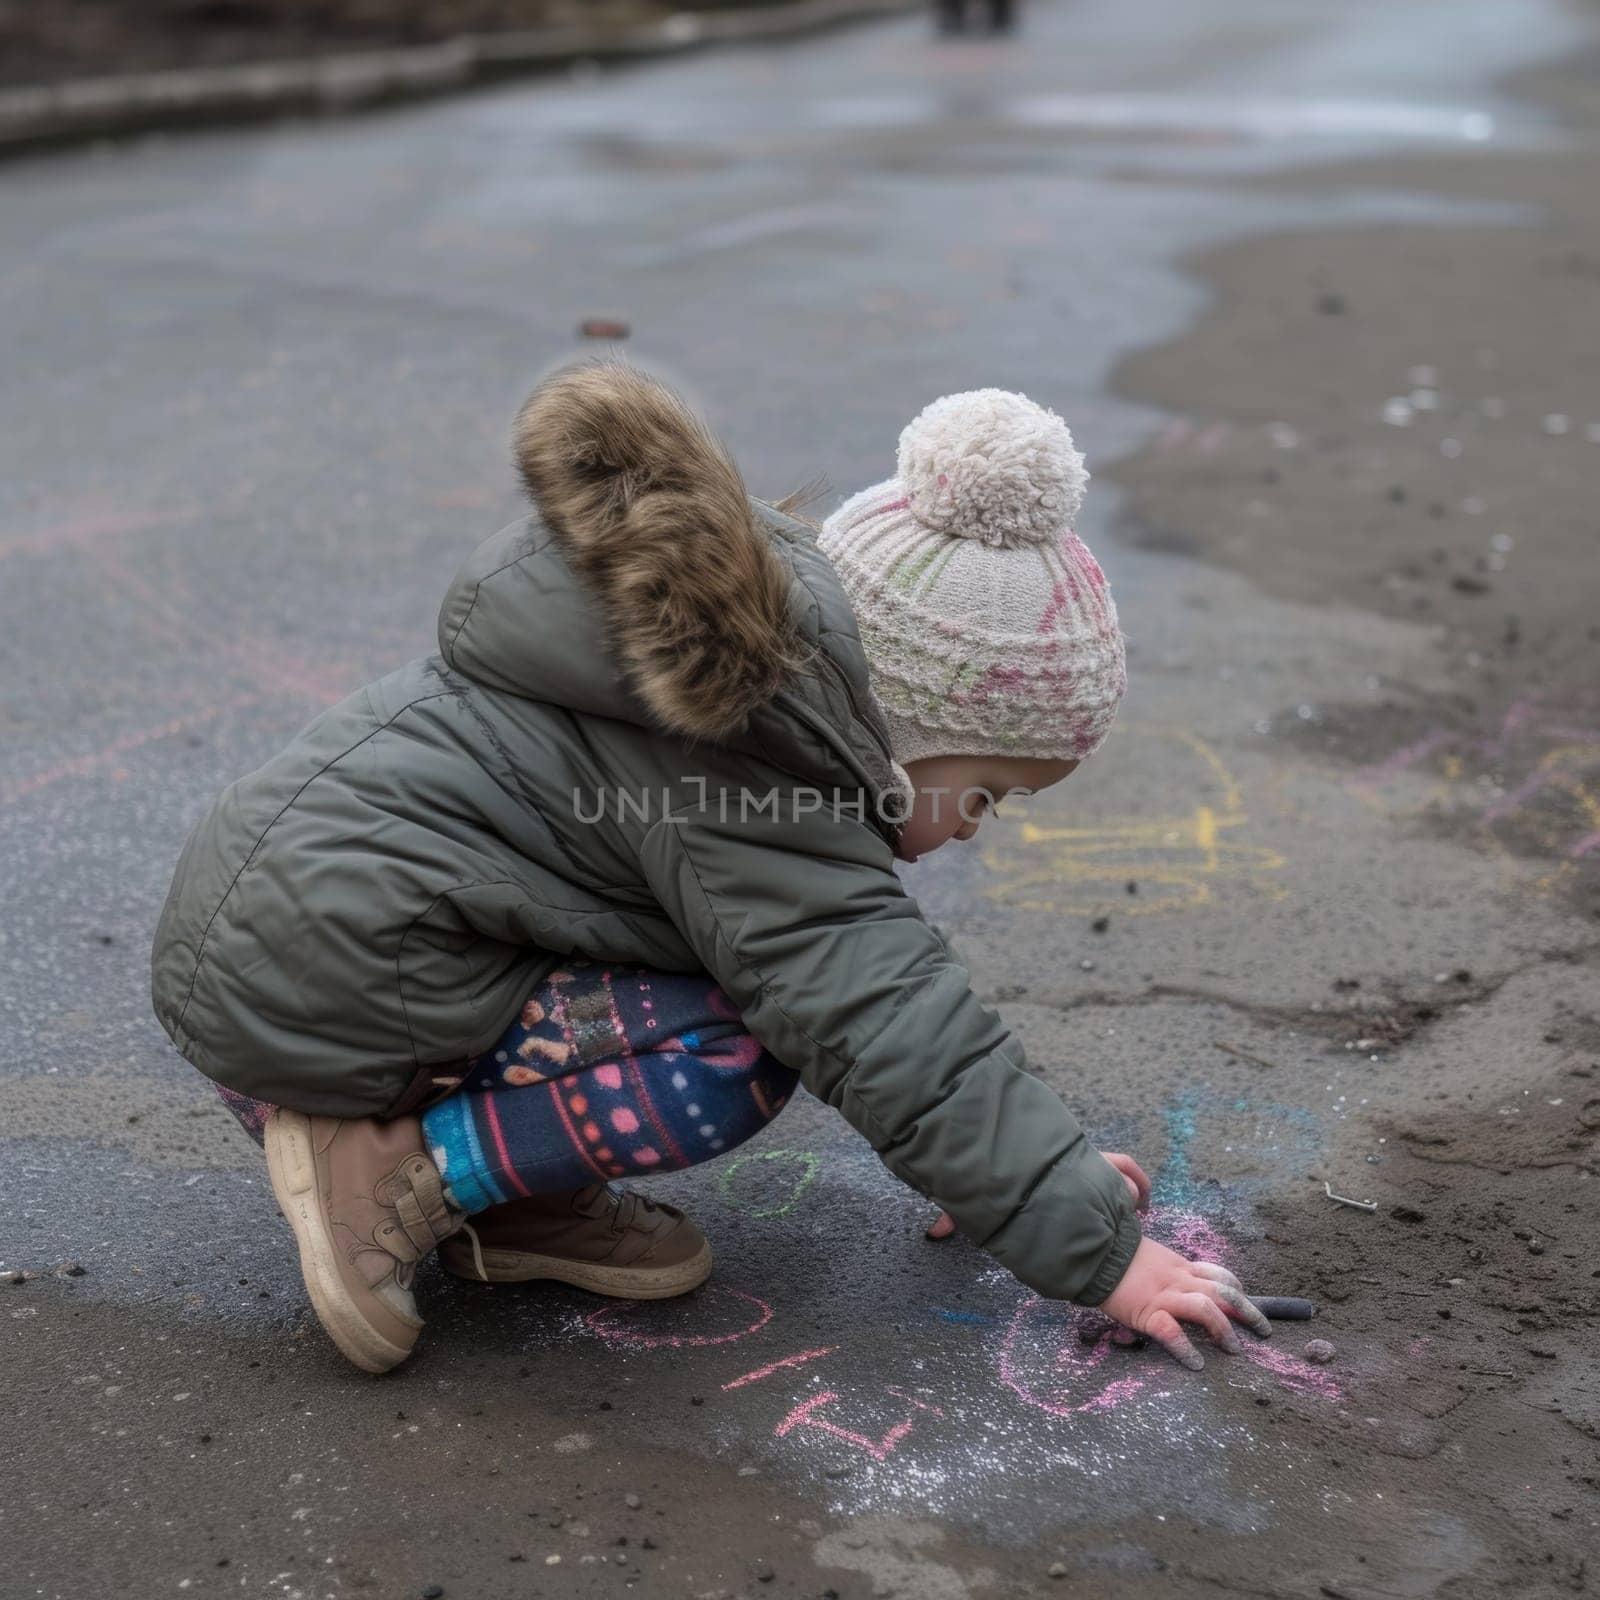 Child in winter clothing crouched on a wet street drawing with chalk